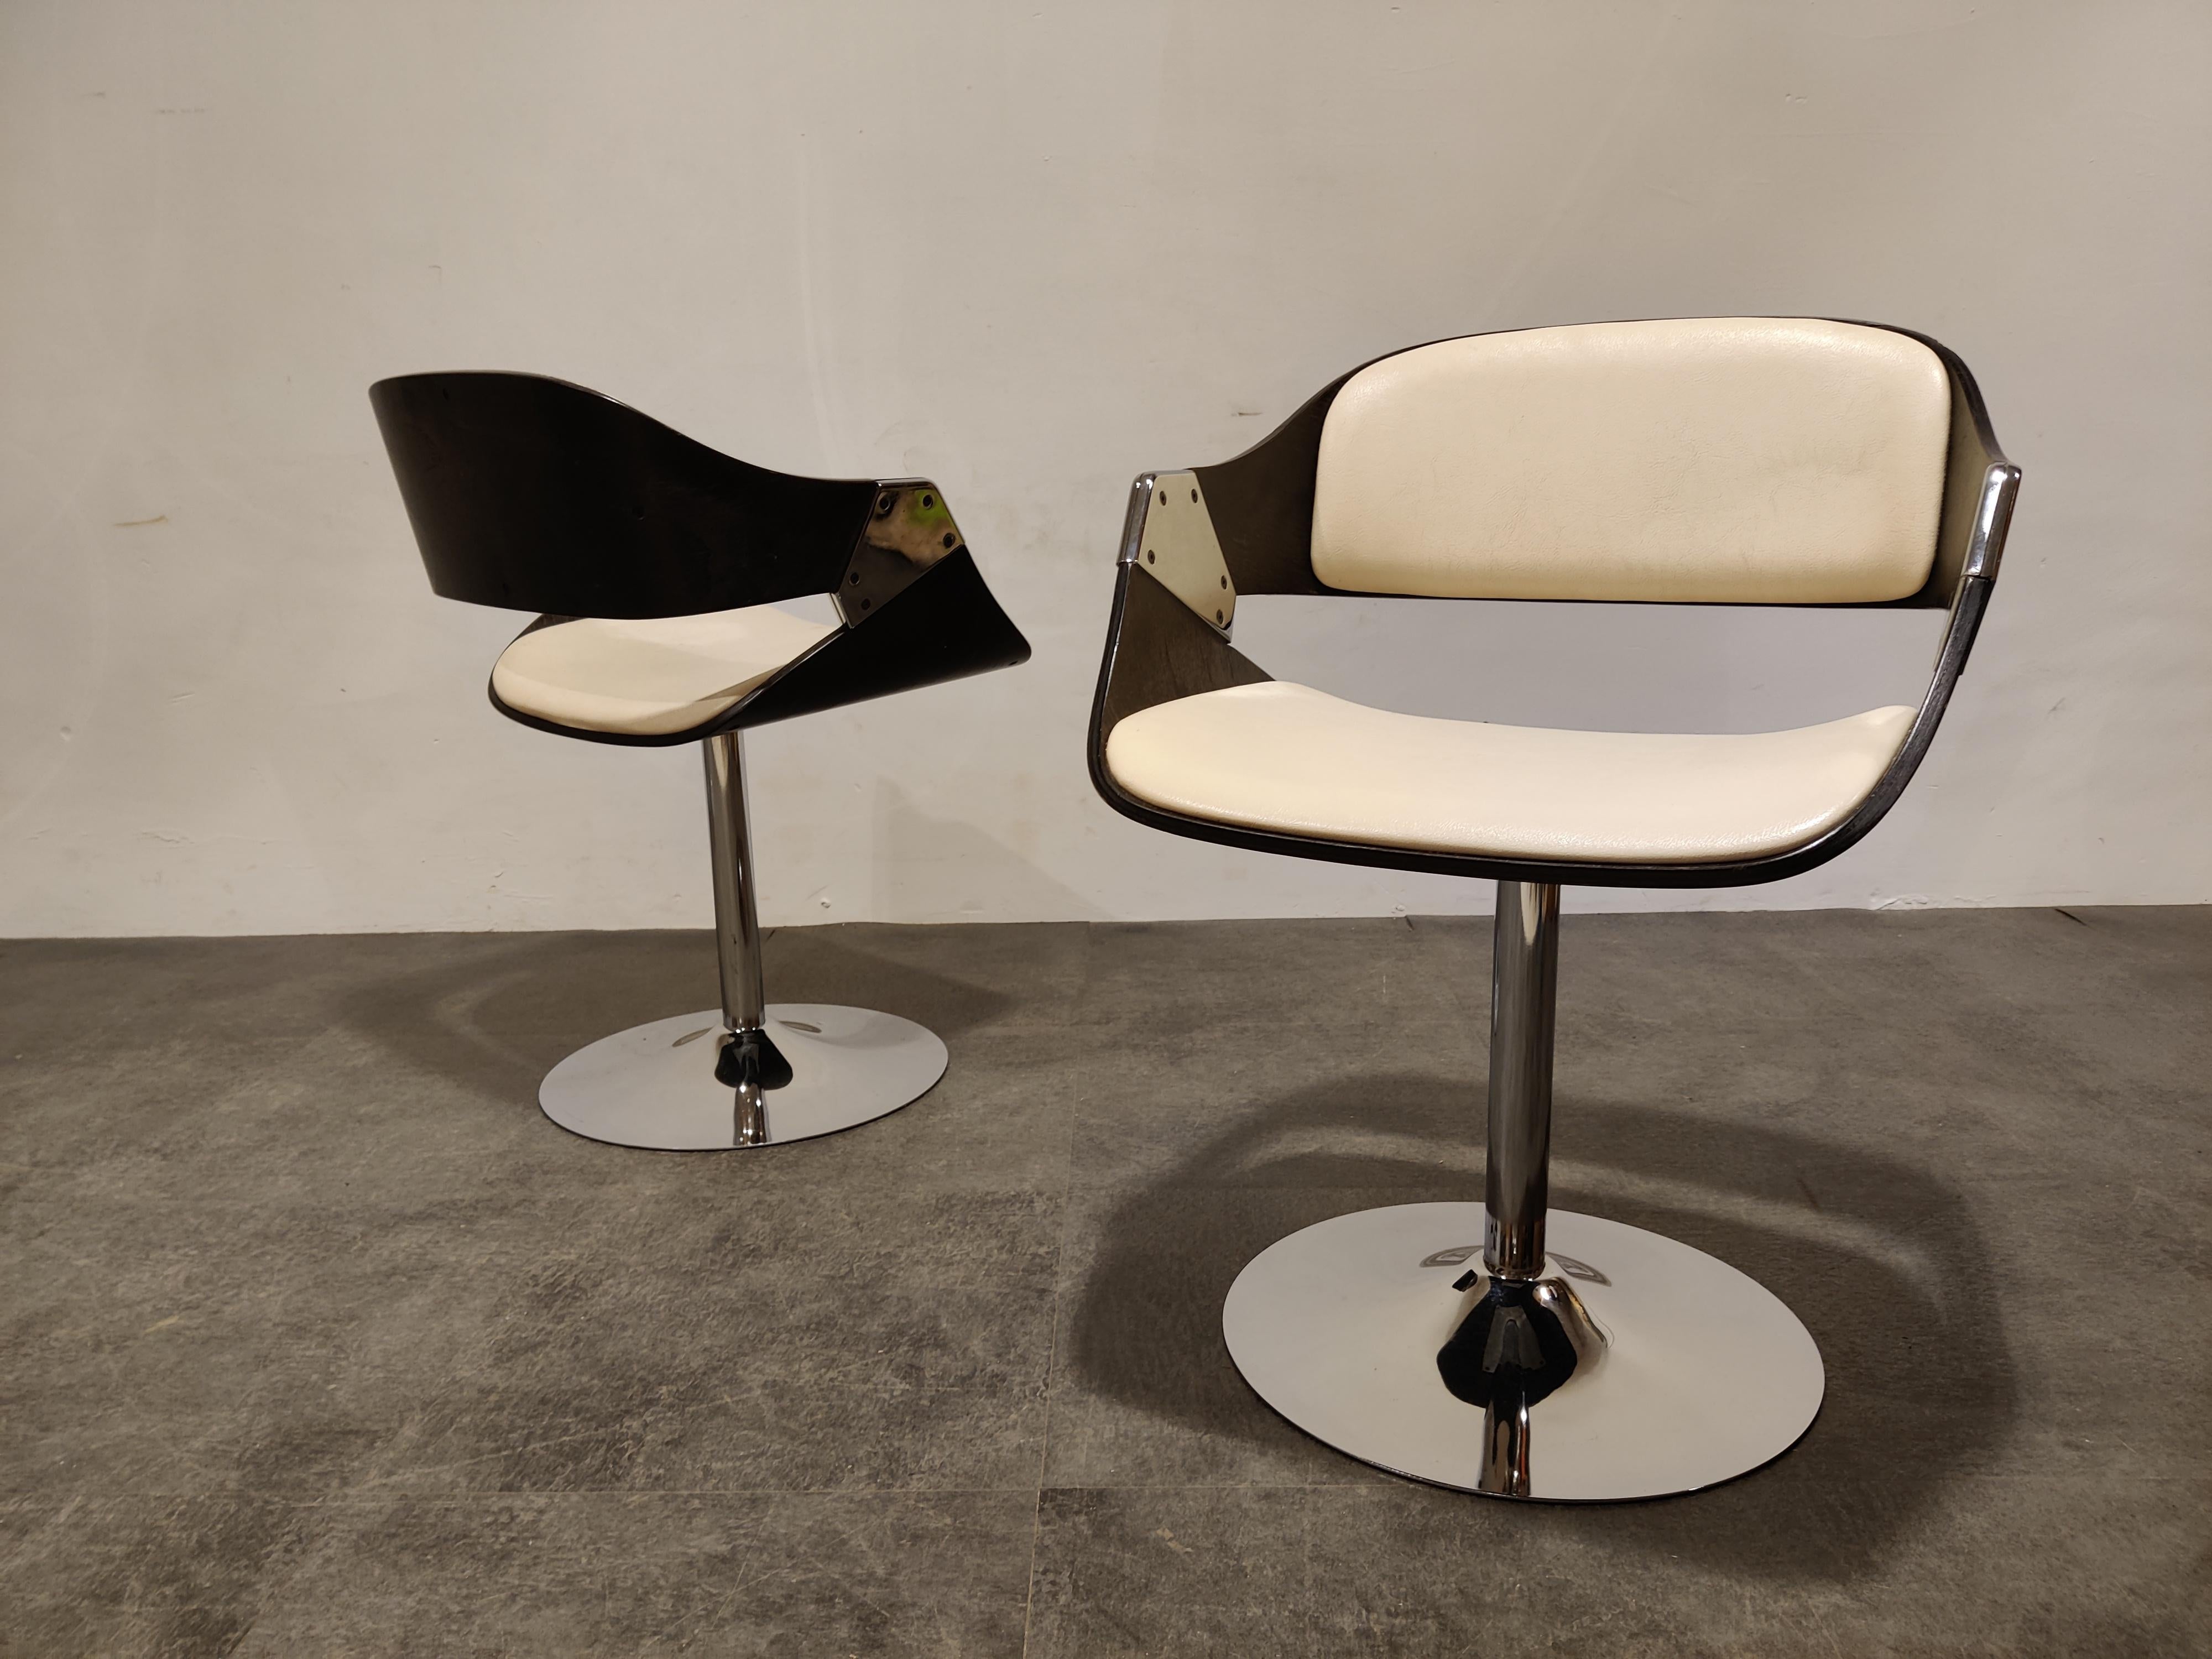 Faux Leather Vintage Swivel Chairs by Rudi Verelst, 1970s